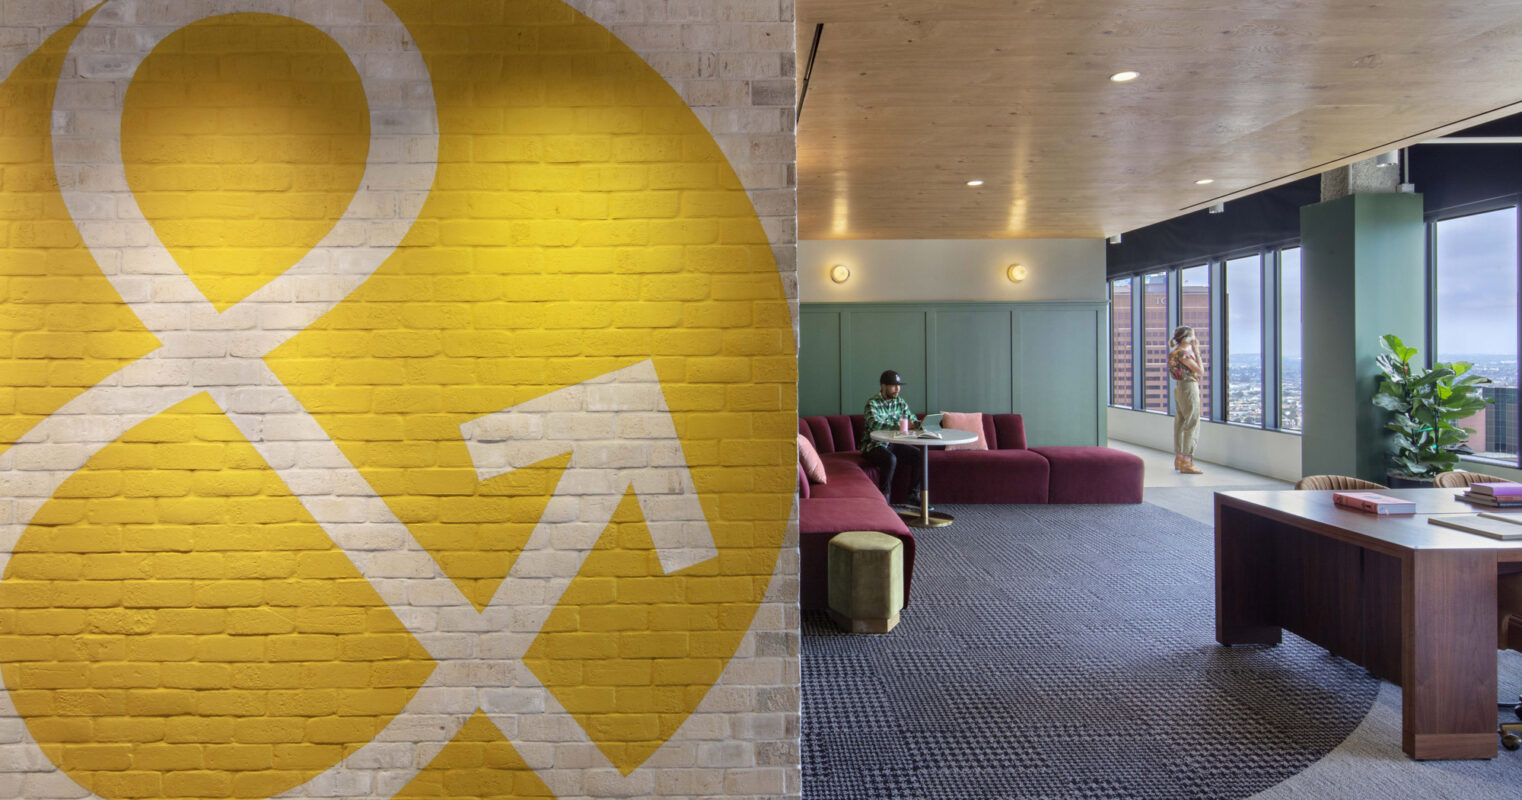 A vibrant yellow accent wall featuring a bold ampersand graphic anchors a modern office lounge. The space balances natural materials with pops of color, offering a mix of private seating areas and a communal workspace with city views.